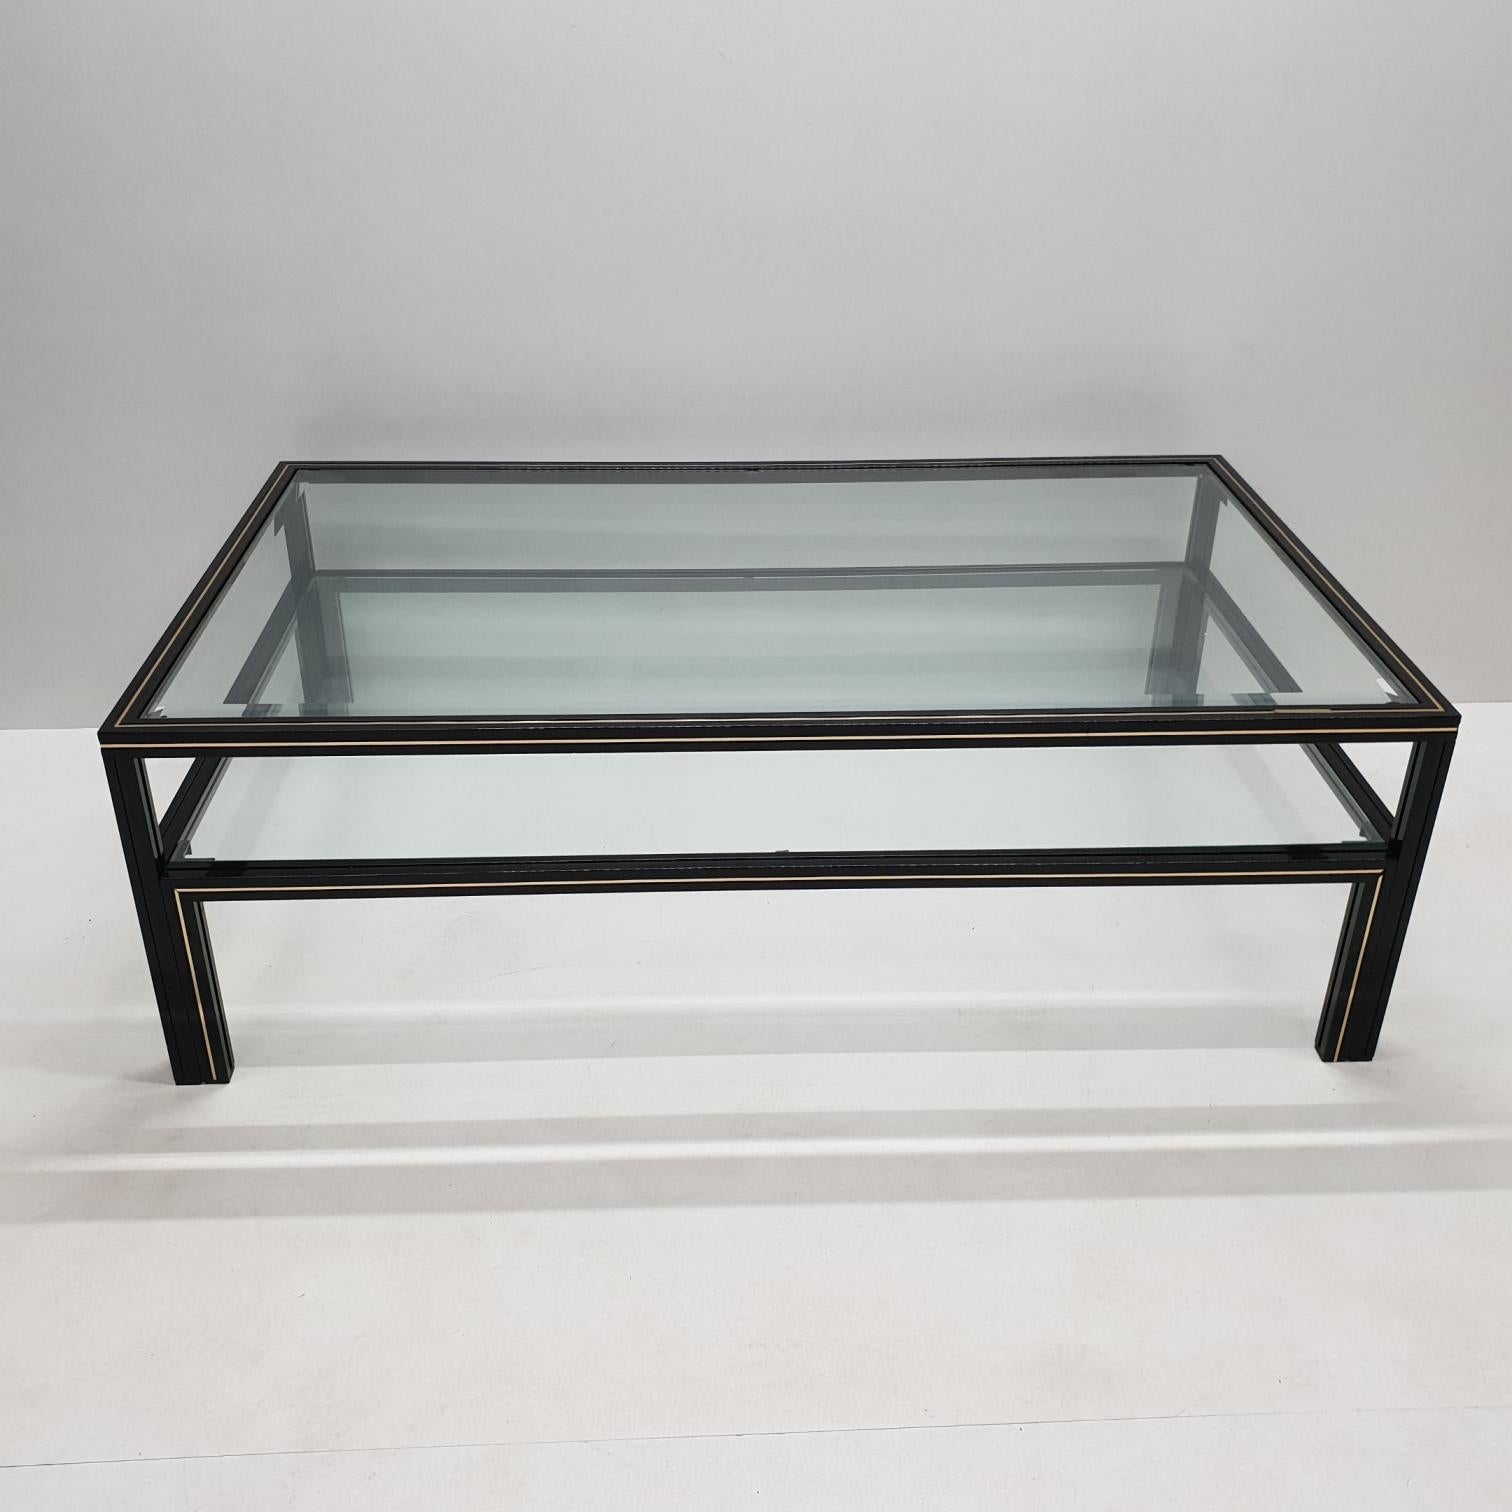 Black lacquer and brass two-tier coffee table by Pierre Vandel for Pierre Vandel (marked), 1970s.
With faceted glass.
French design.

Very good vintage condition, no defects, but it may show slight traces of use.